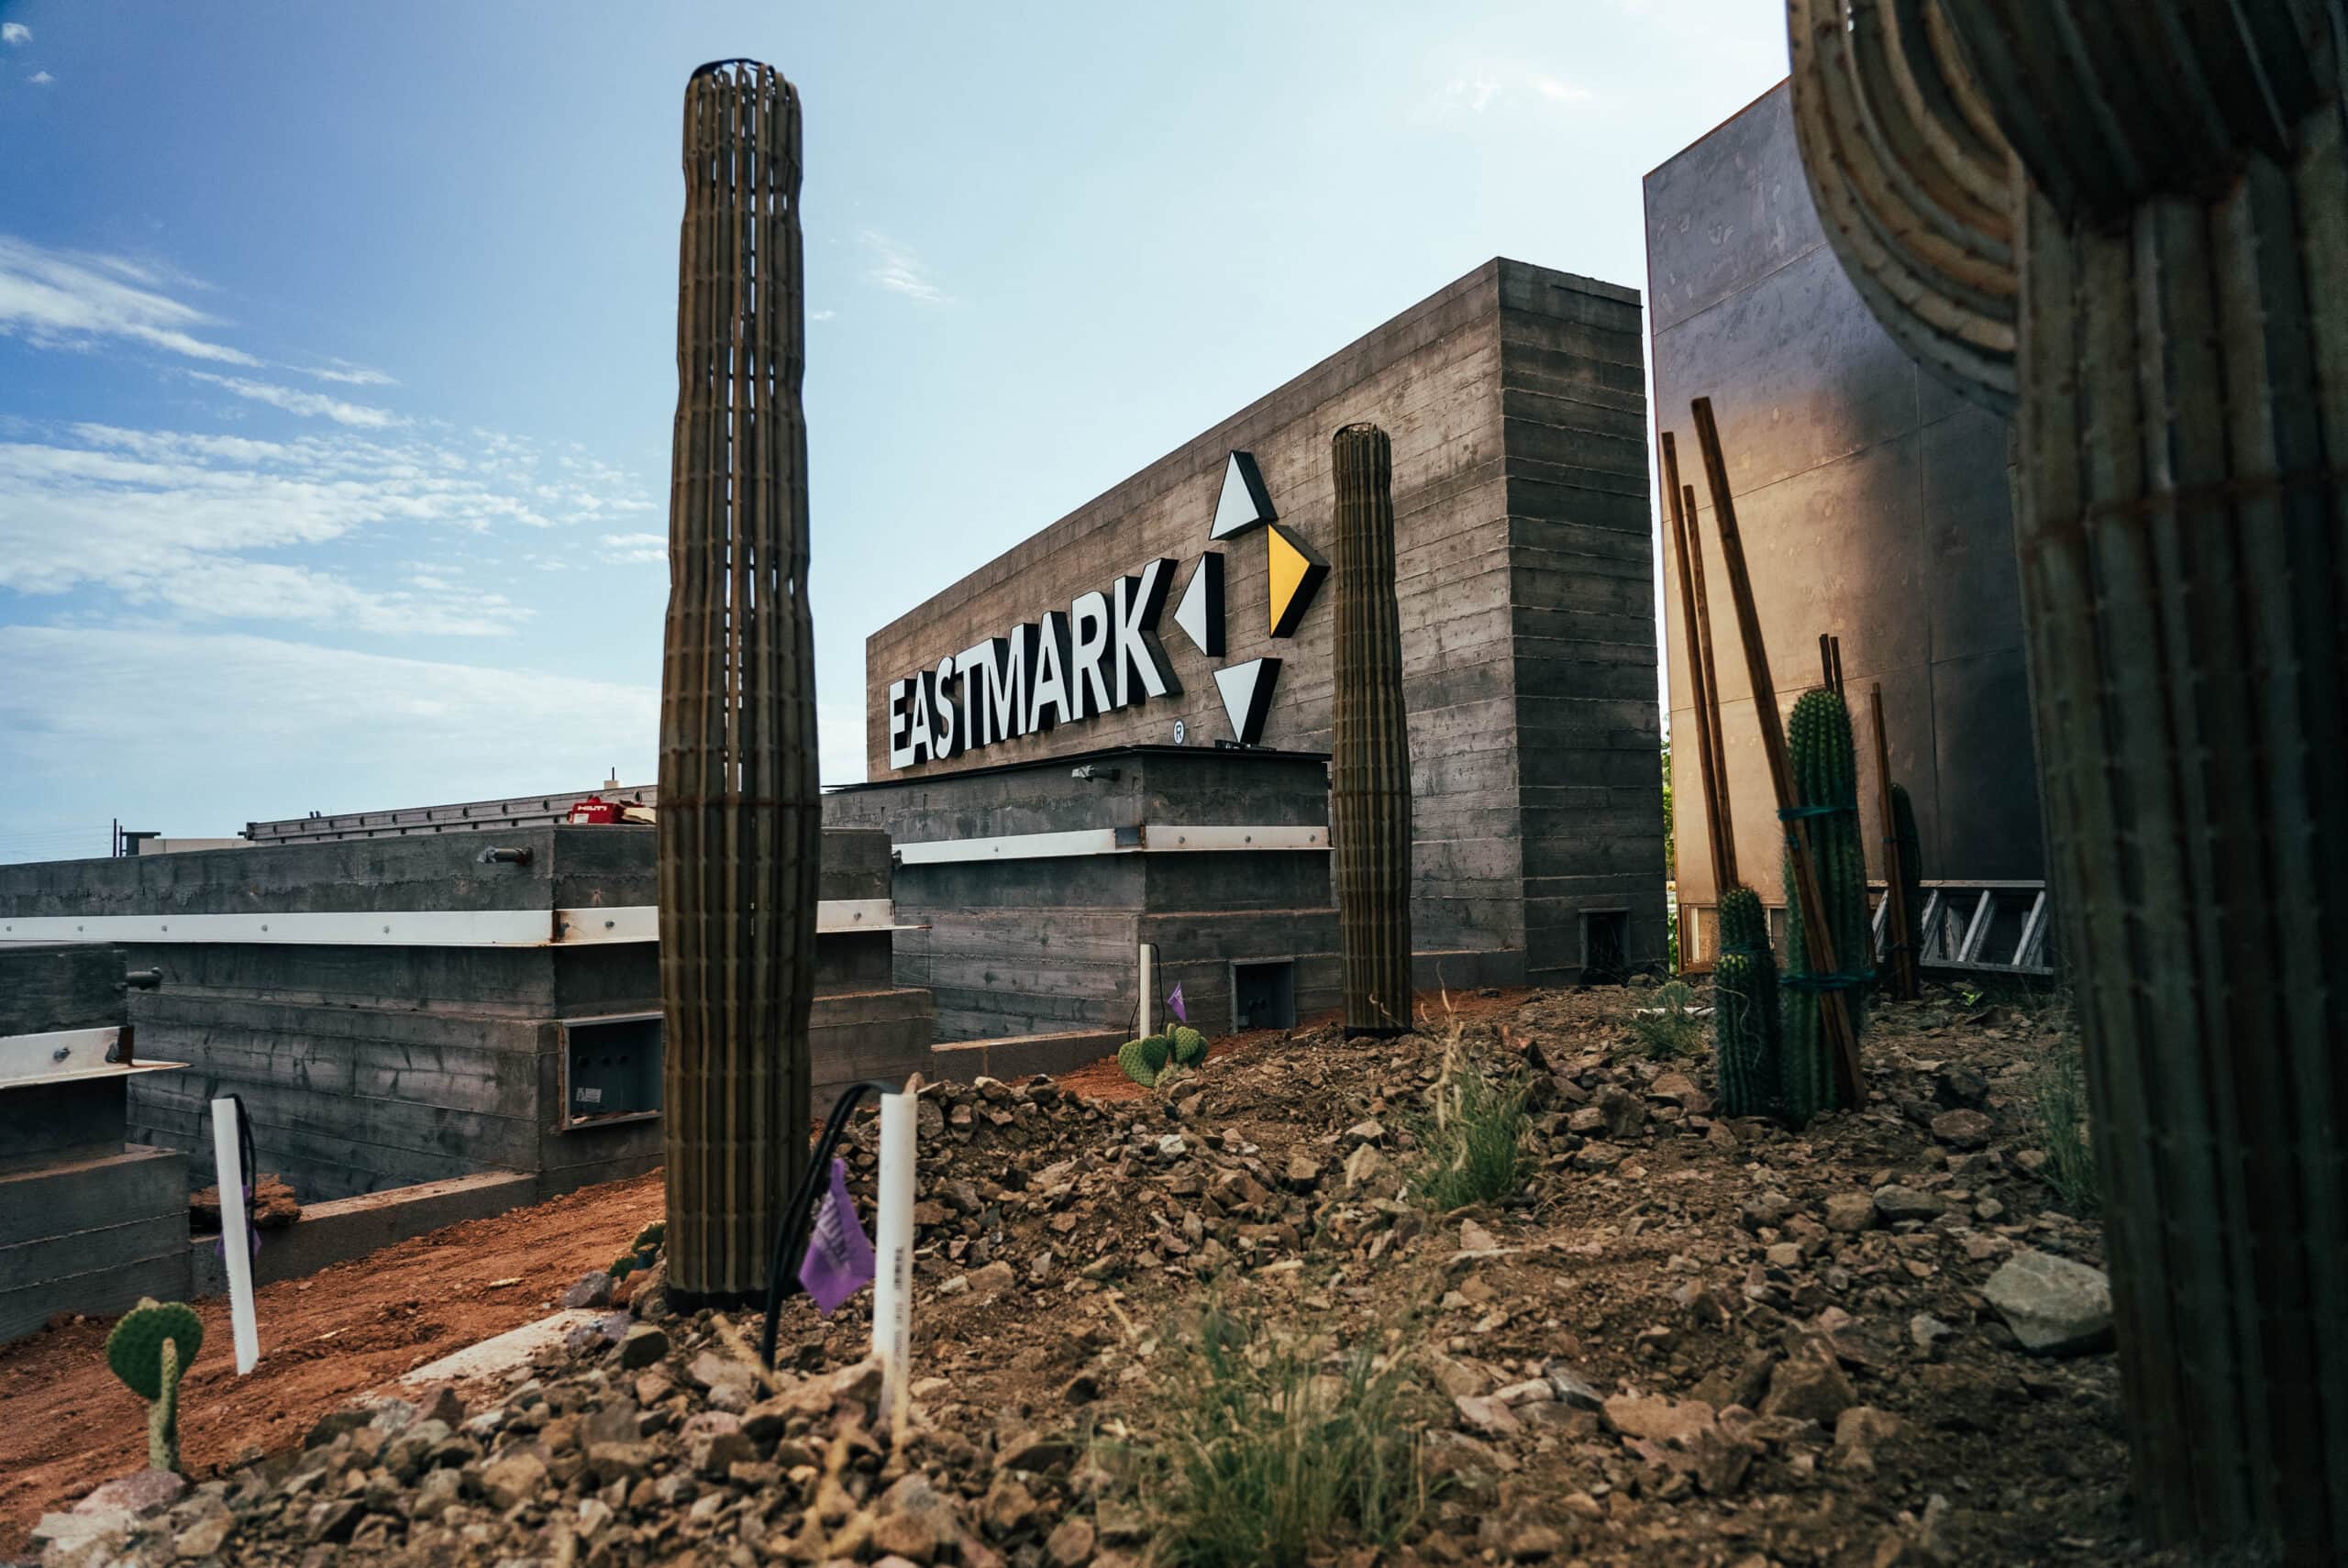 A cactus in front of building with a sign in the Biltmore Area.